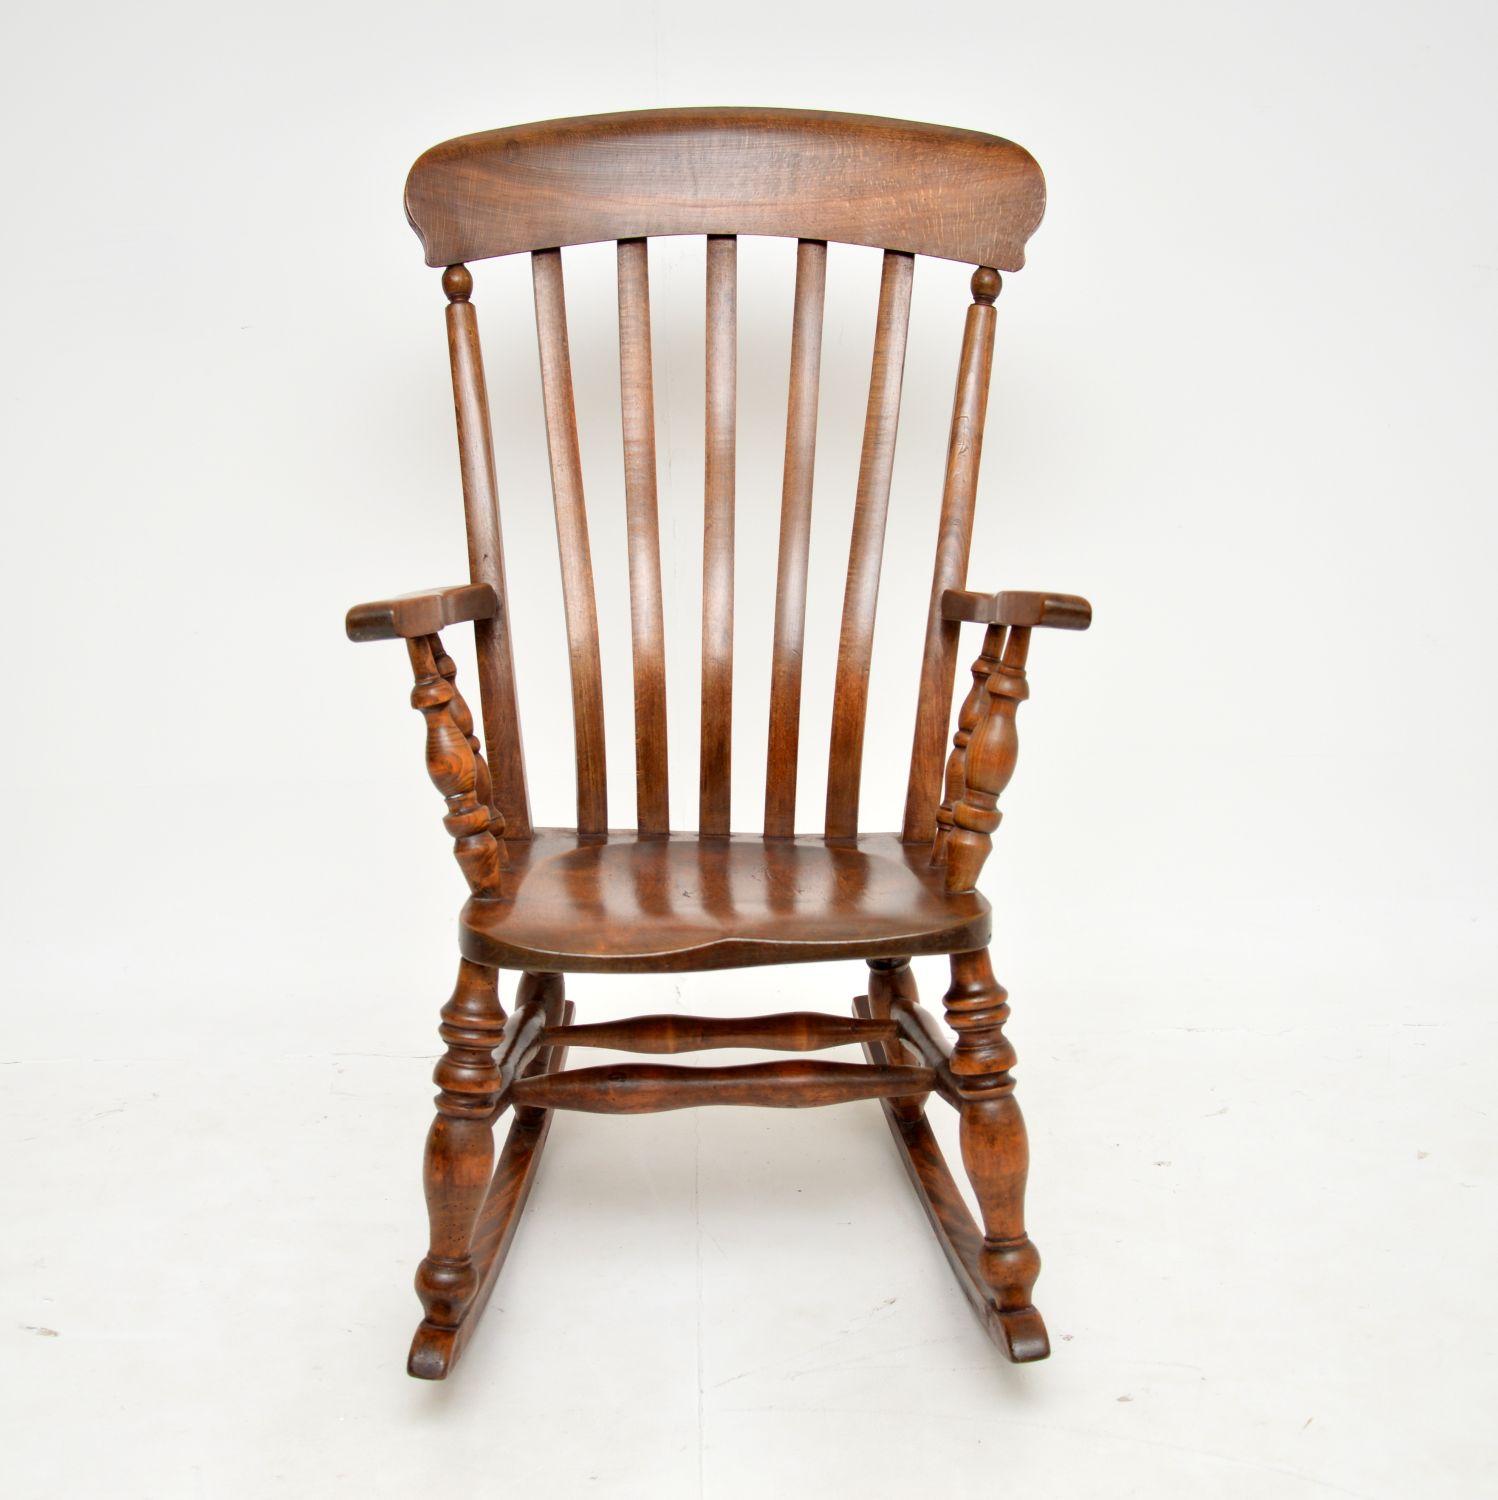 English Antique Victorian Windsor Rocking Chair